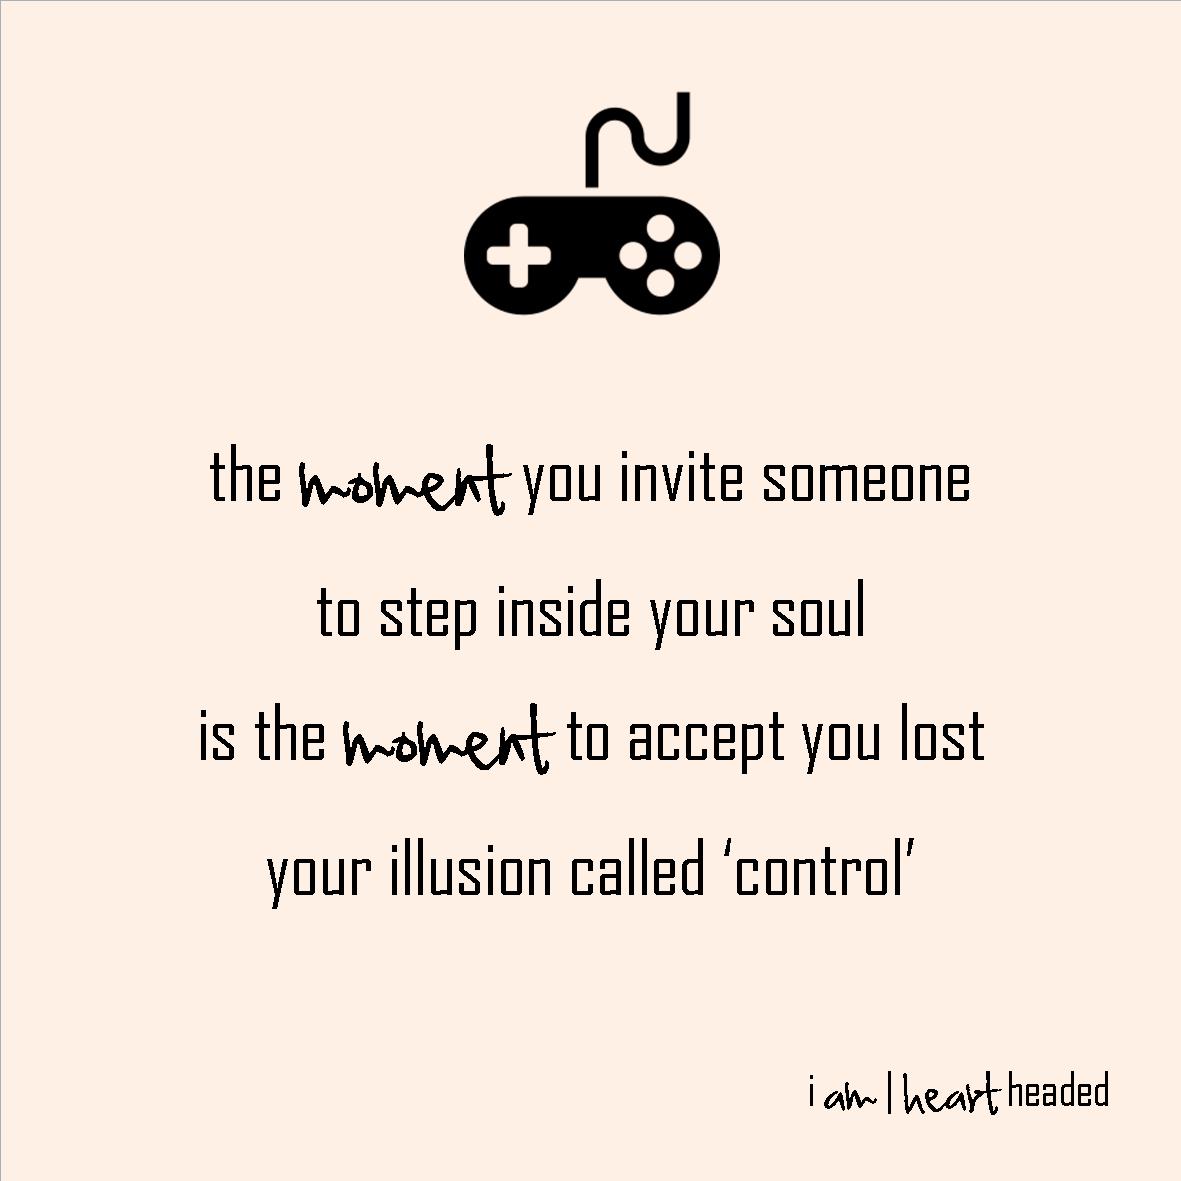 full-size featured image of quote 'illusion called control' in category 'sparkly' at i am | heart headed